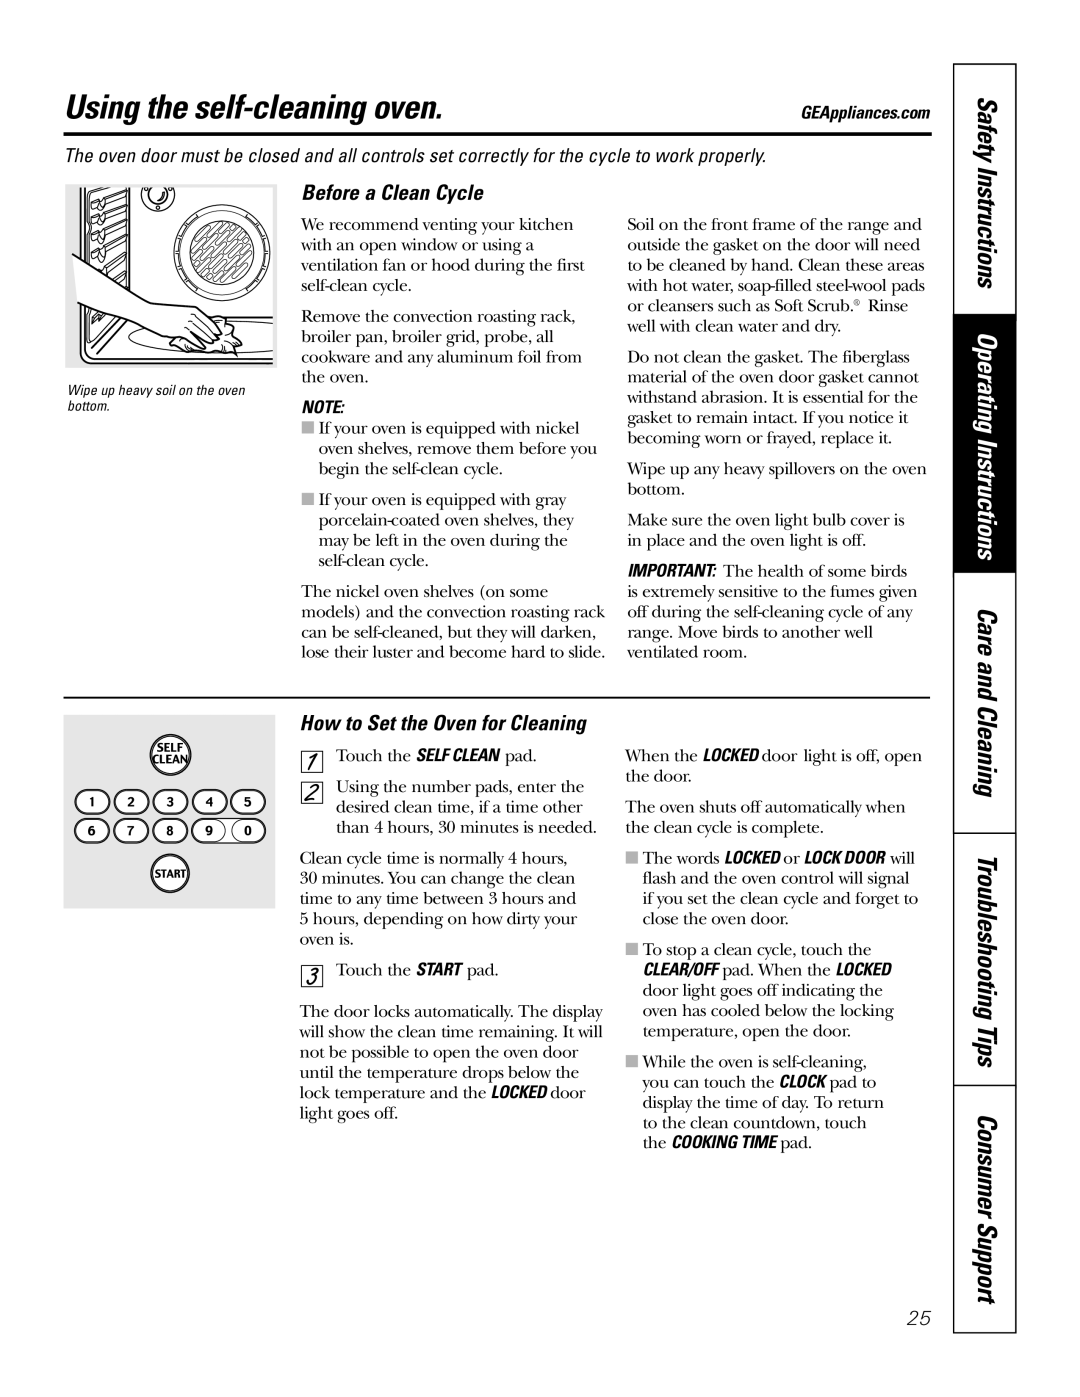 GE 49-80117-1 Using the self-cleaning oven, Instructions Operating Instructions Care and, Before a Clean Cycle, Safety 